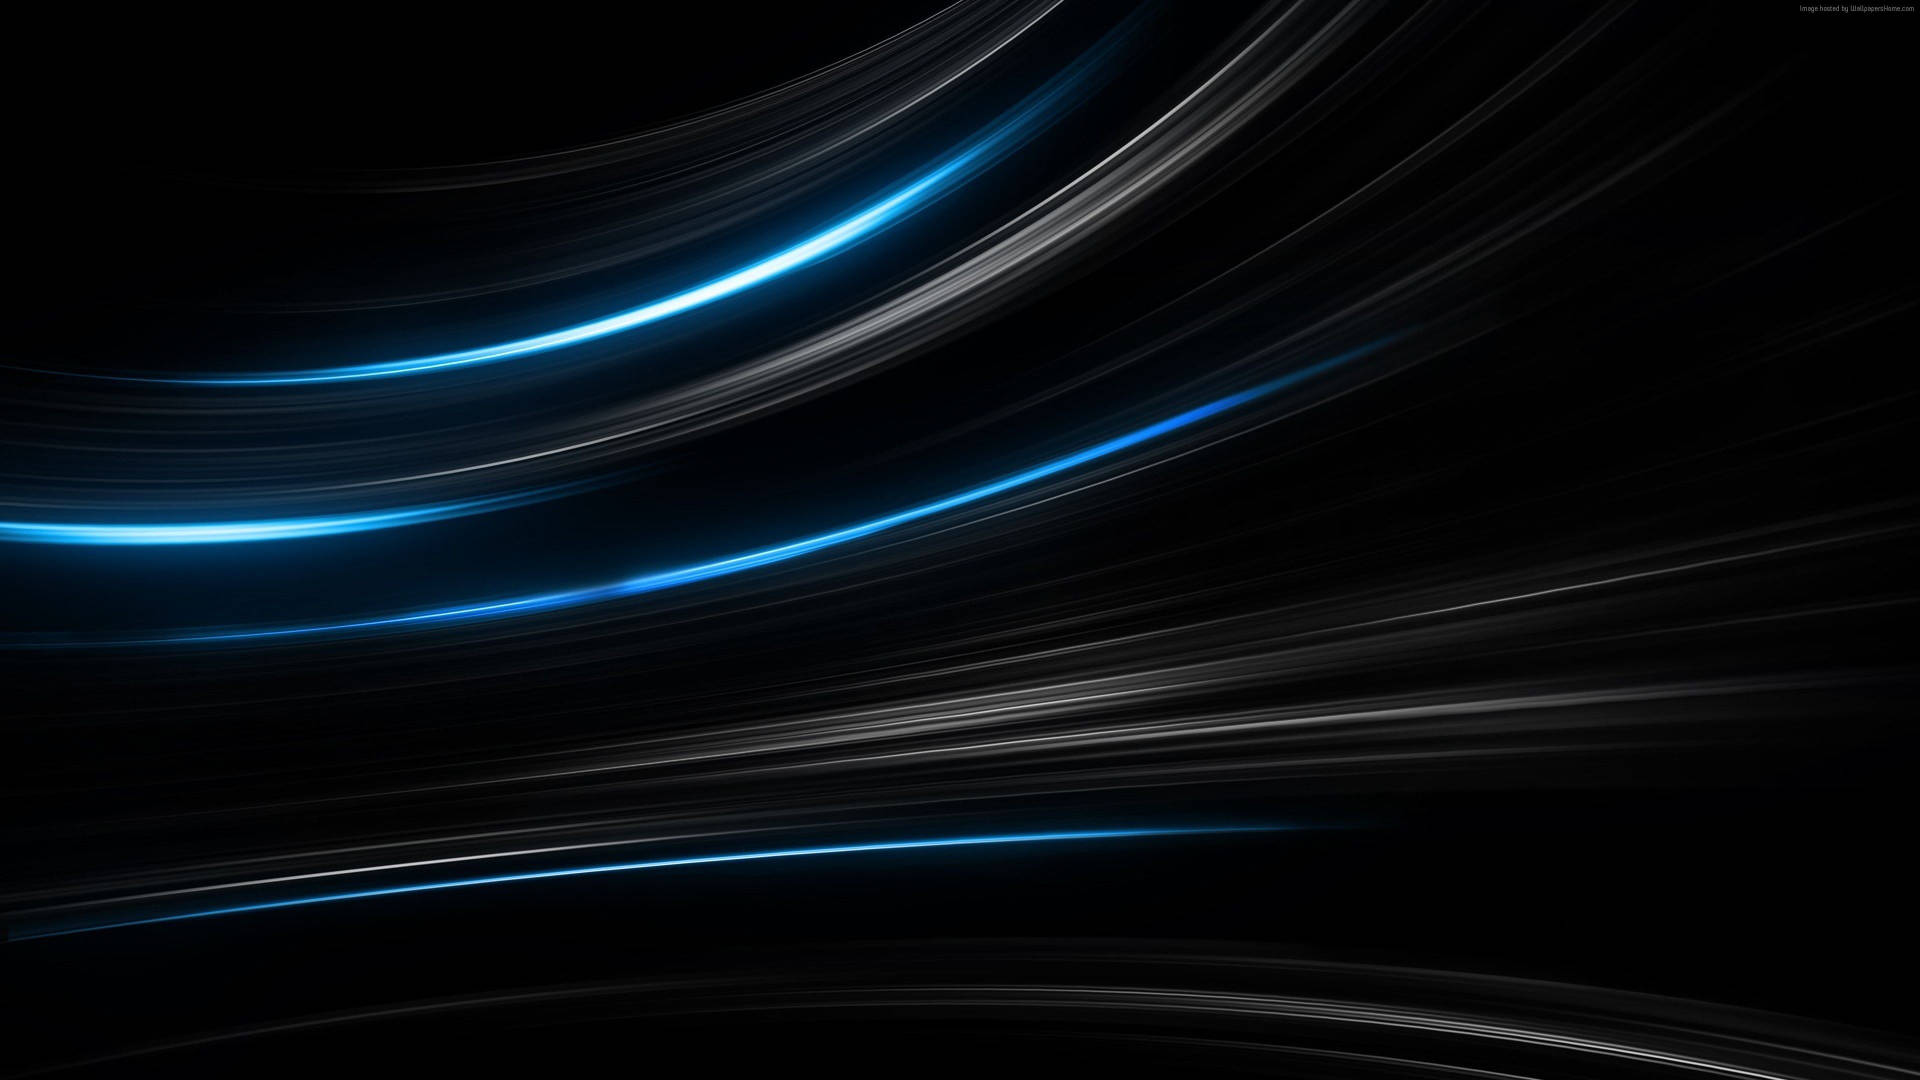 Black And Blue Curved Lines Picture